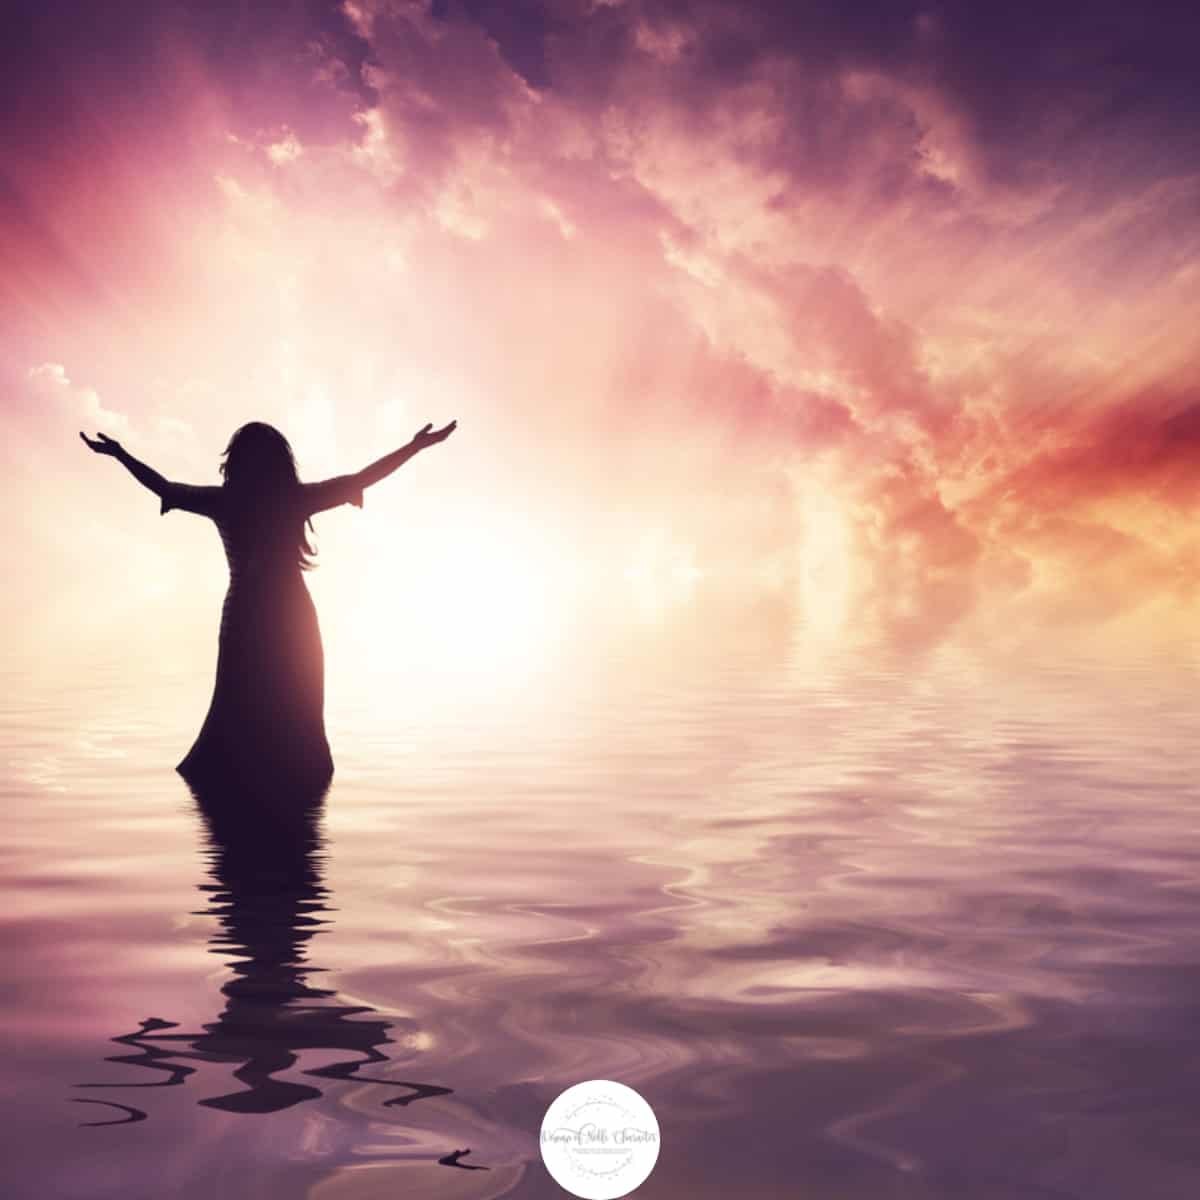 image of woman raising her arms upward at sunset for the post Obey God rather than man: what it means and how to live it out daily